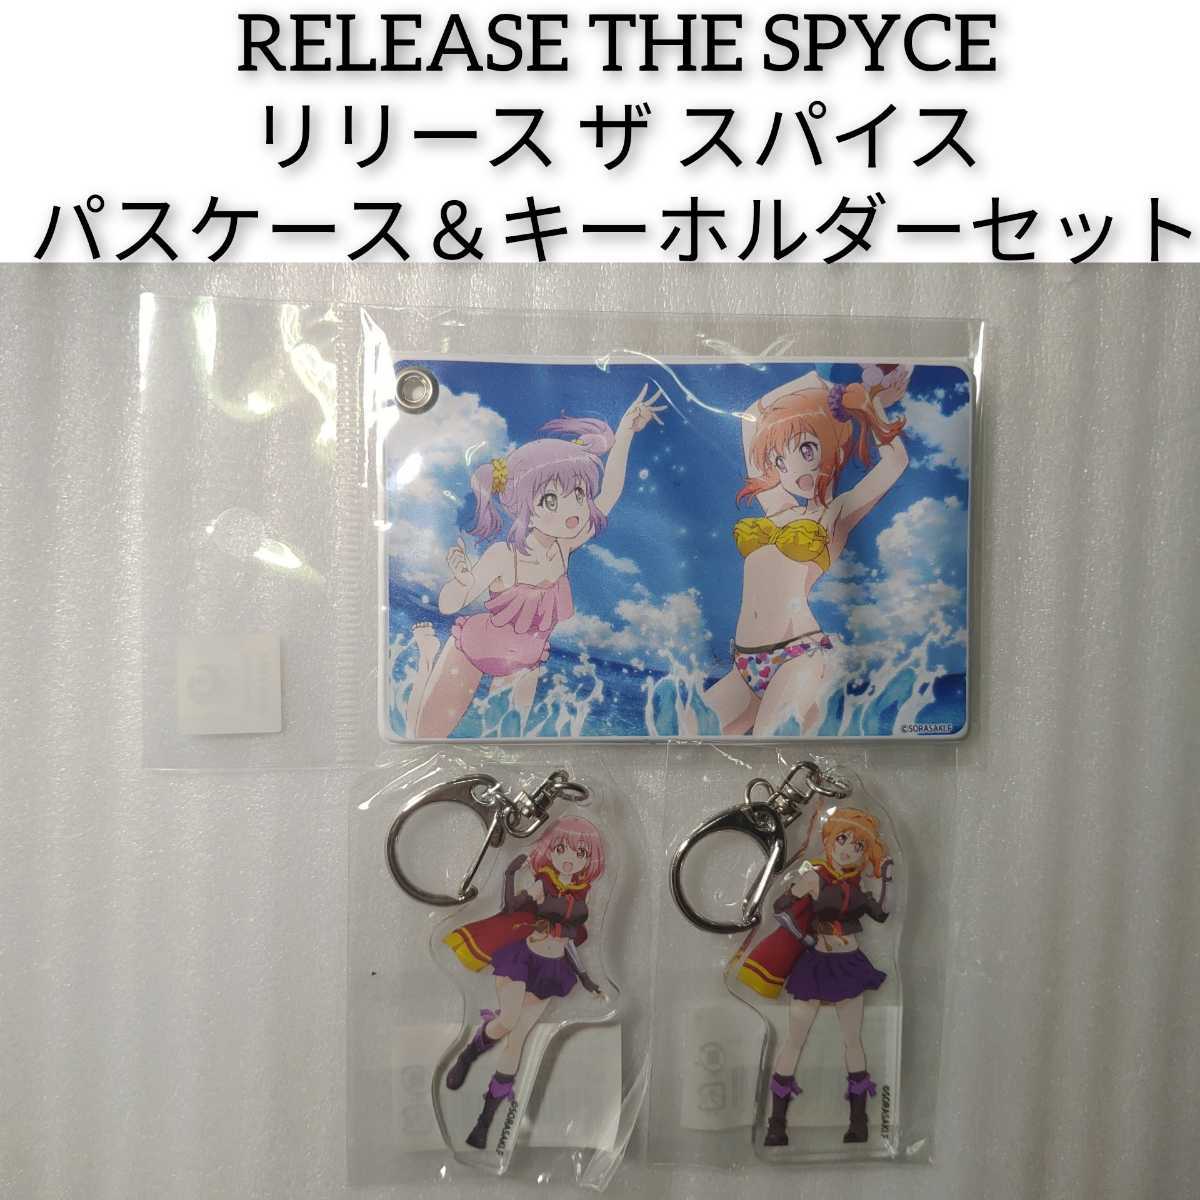 RELEASE THE SPYCE Release The spice pass case key holder set source Momo . thousand fee life Sagami maple li squirrel pa anime goods 0